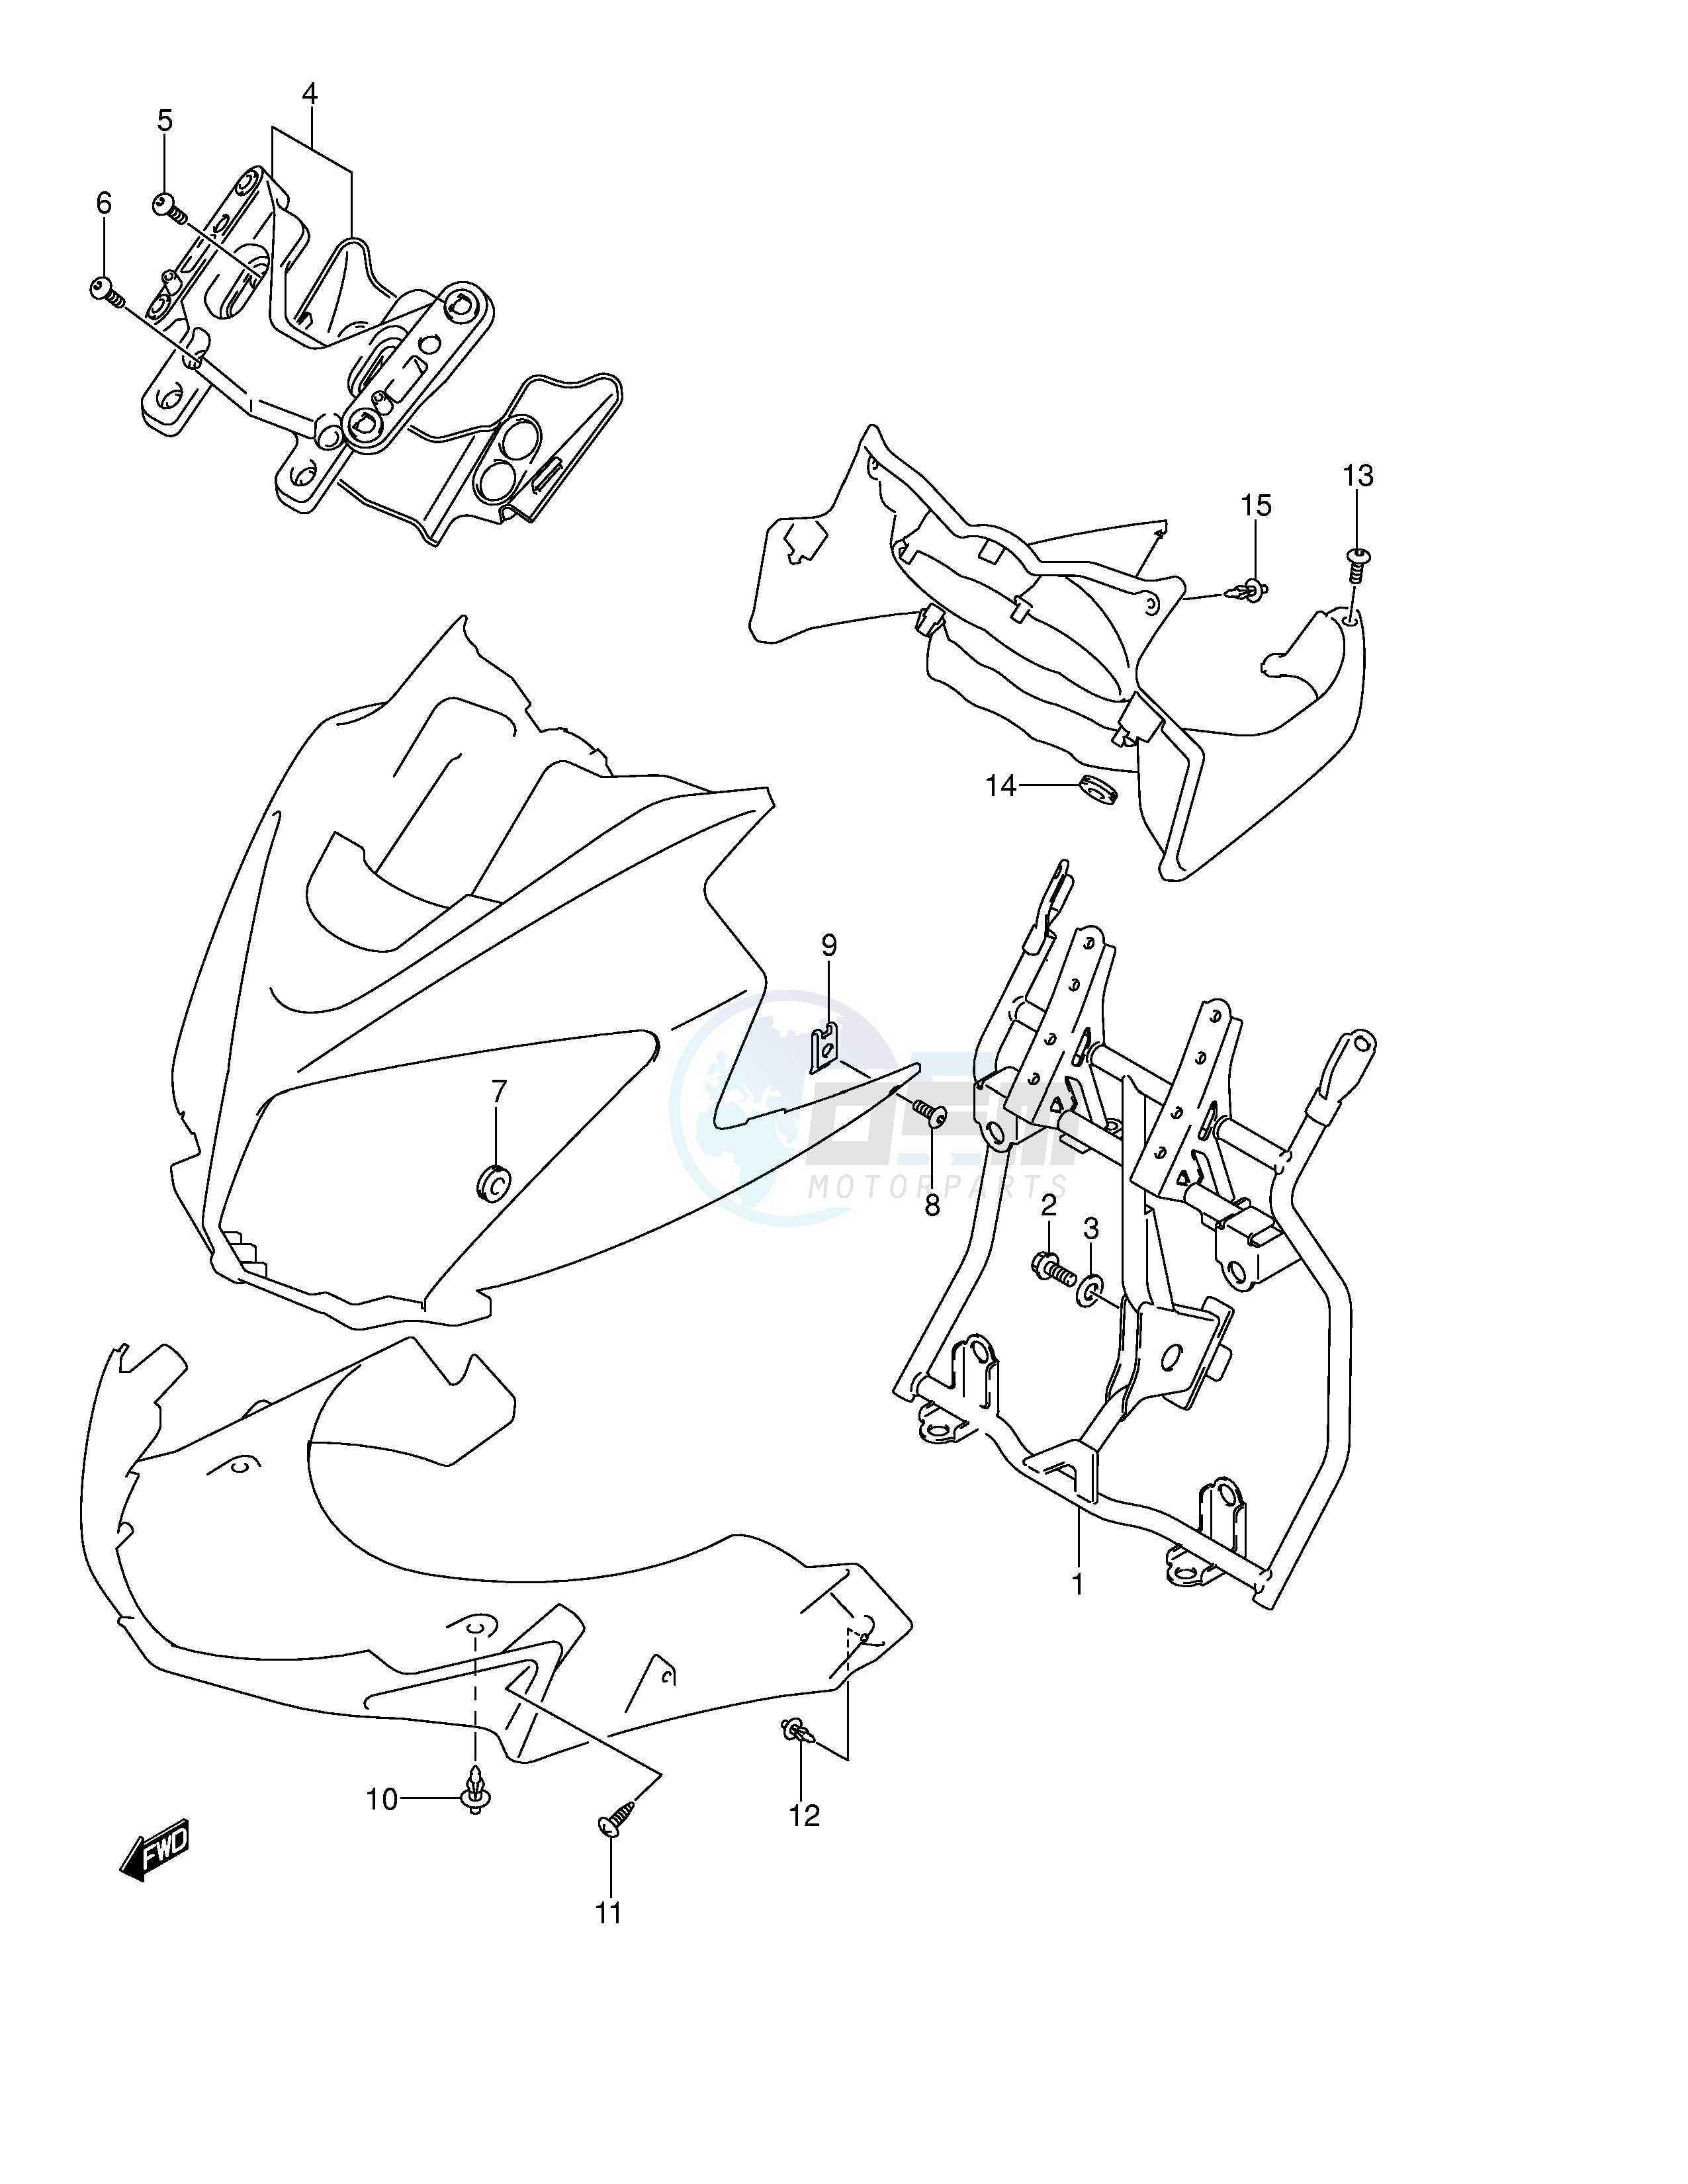 COWL BODY INSTALLATION PARTS image